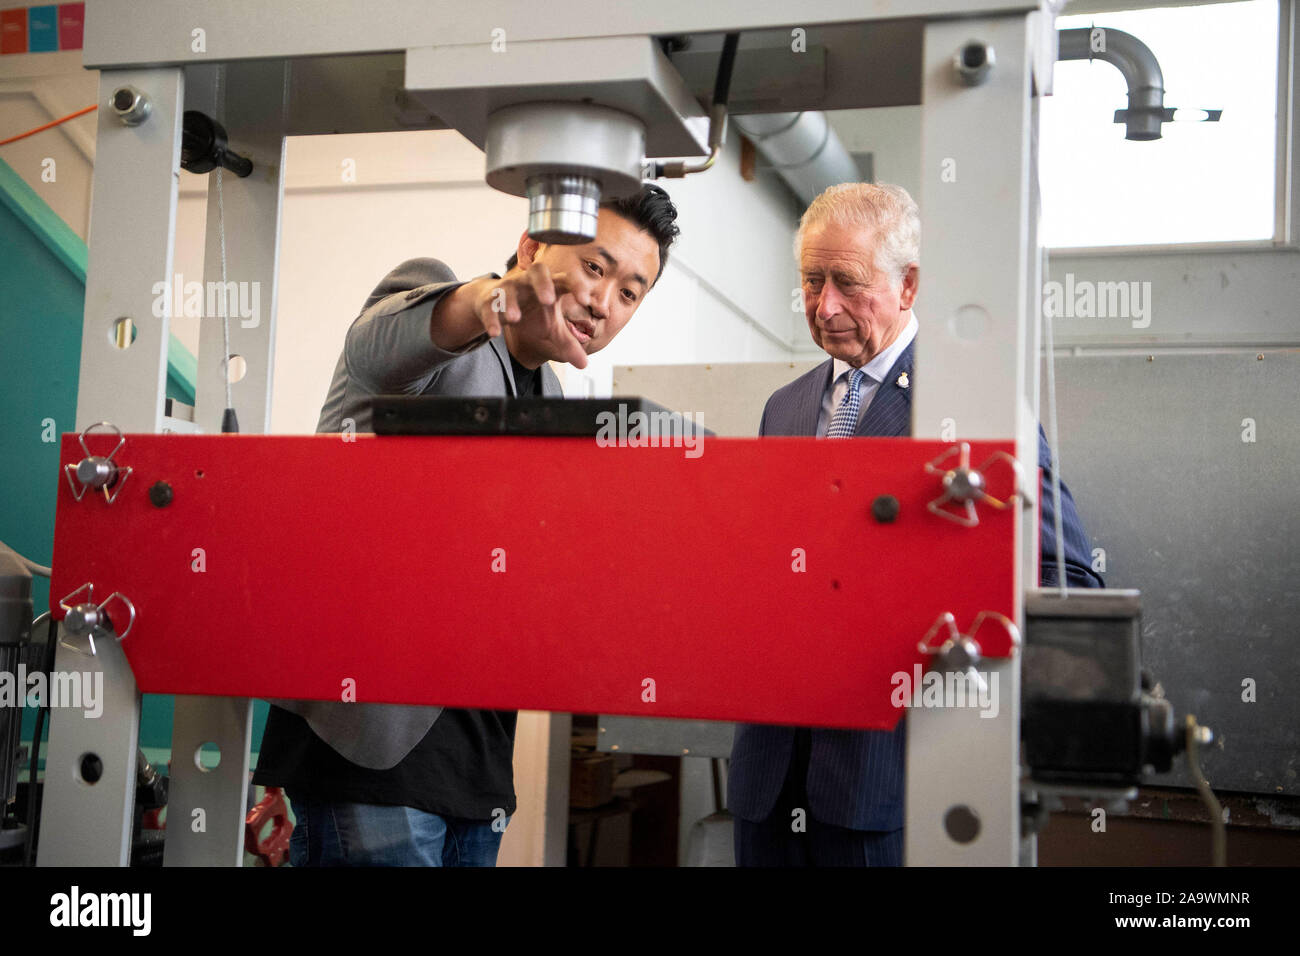 The Prince of Wales looks at the manufacturing process of products made out of plastic waste, during a visit to Critical Design, an Auckland based company that manufactures a range of office and homeware products from recycled materials, at Wesley Intermediate School in Auckland on the second day of the royal visit to New Zealand. PA Photo. Picture date: Monday November 18, 2019. See PA story ROYAL Tour. Photo credit should read: Victoria Jones/PA Wire Stock Photo